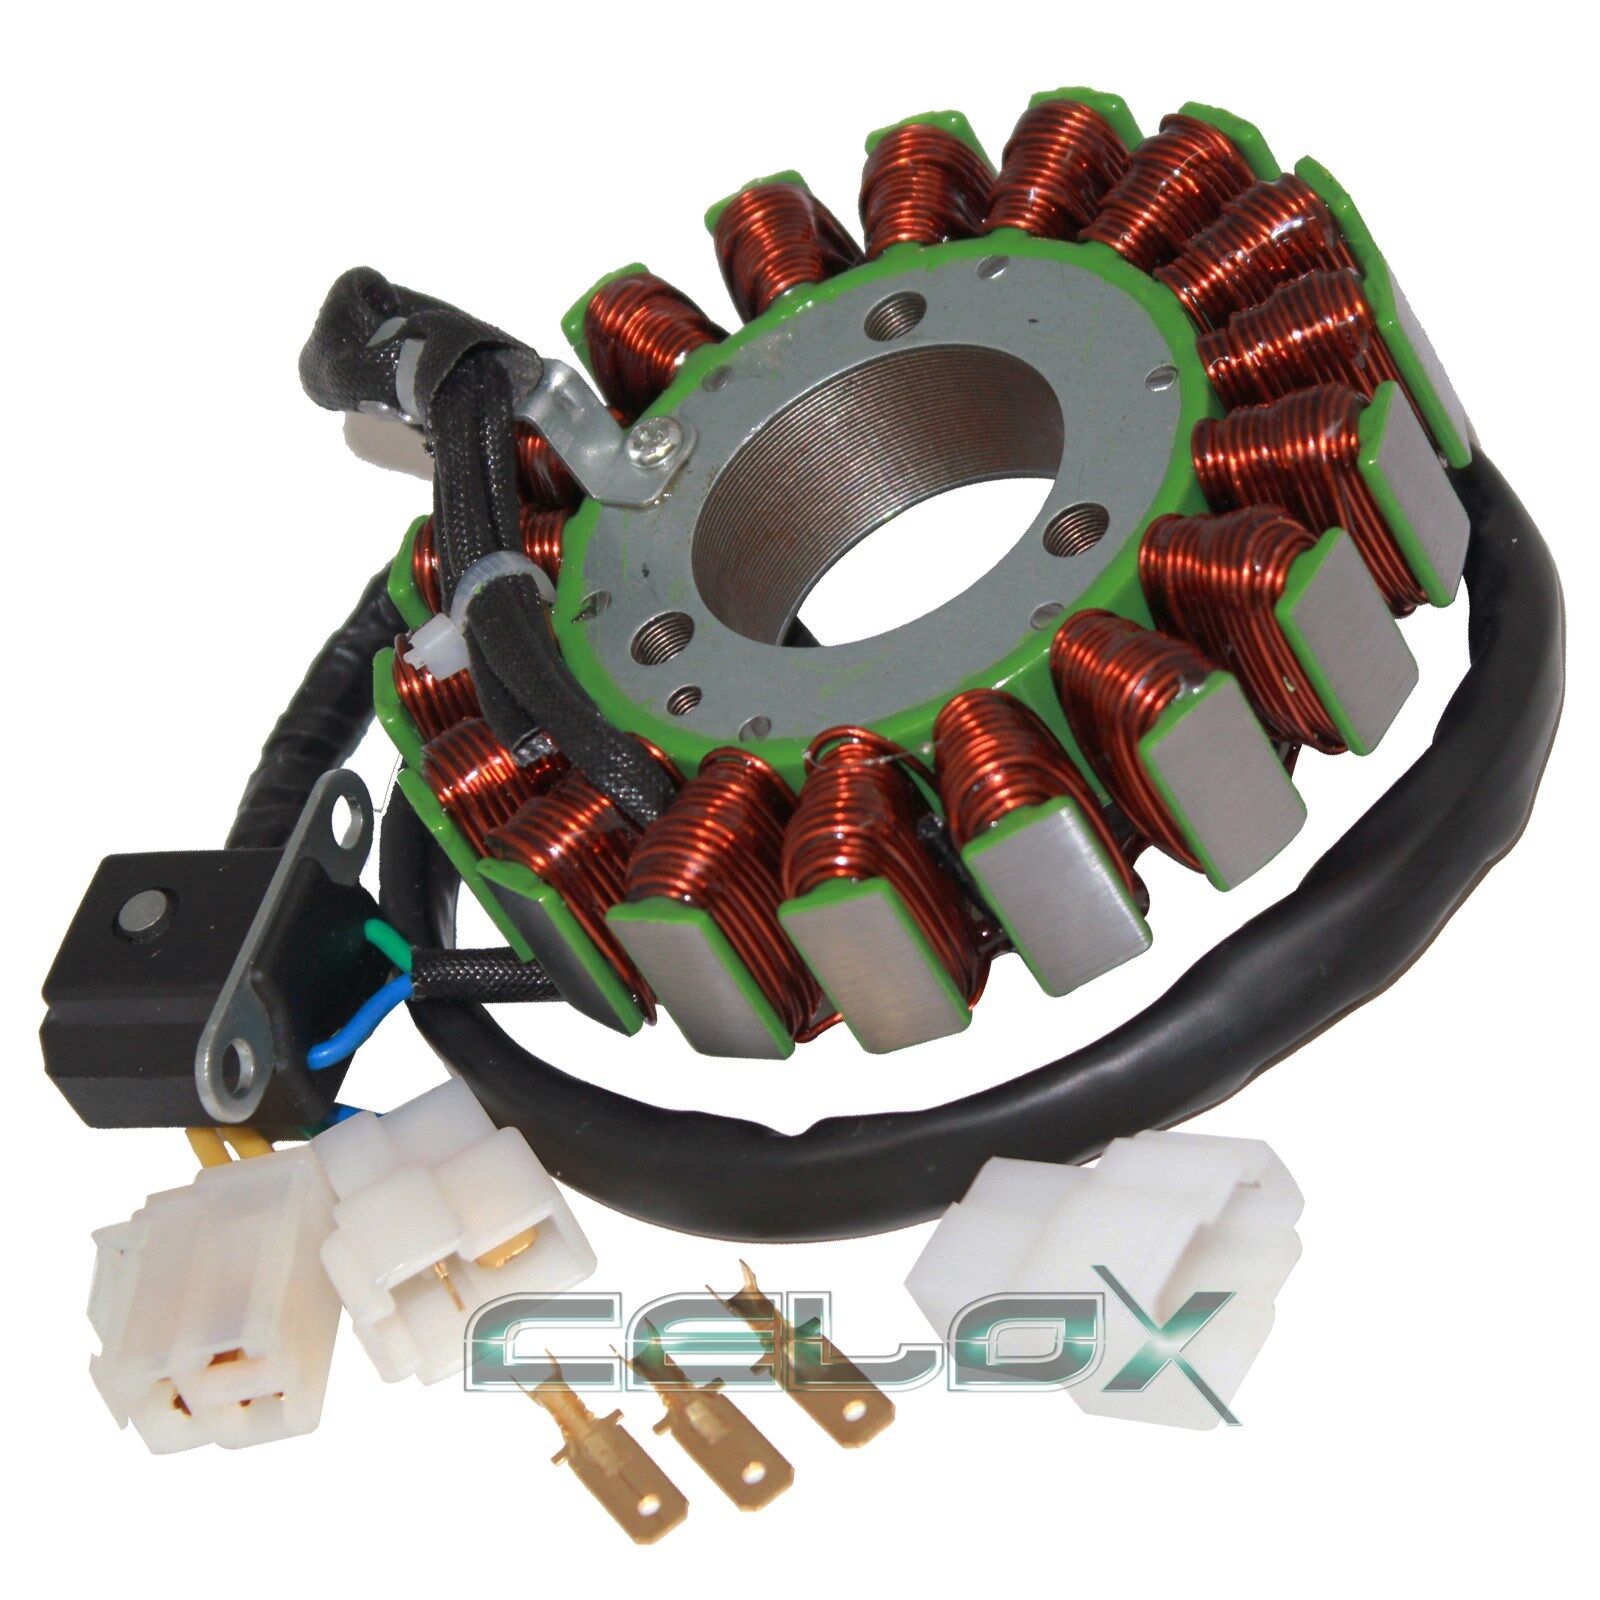 Stator for Hyosung GT650 GT650S GT650R FI 2006 2007 2008 2009 2010 2011-2013